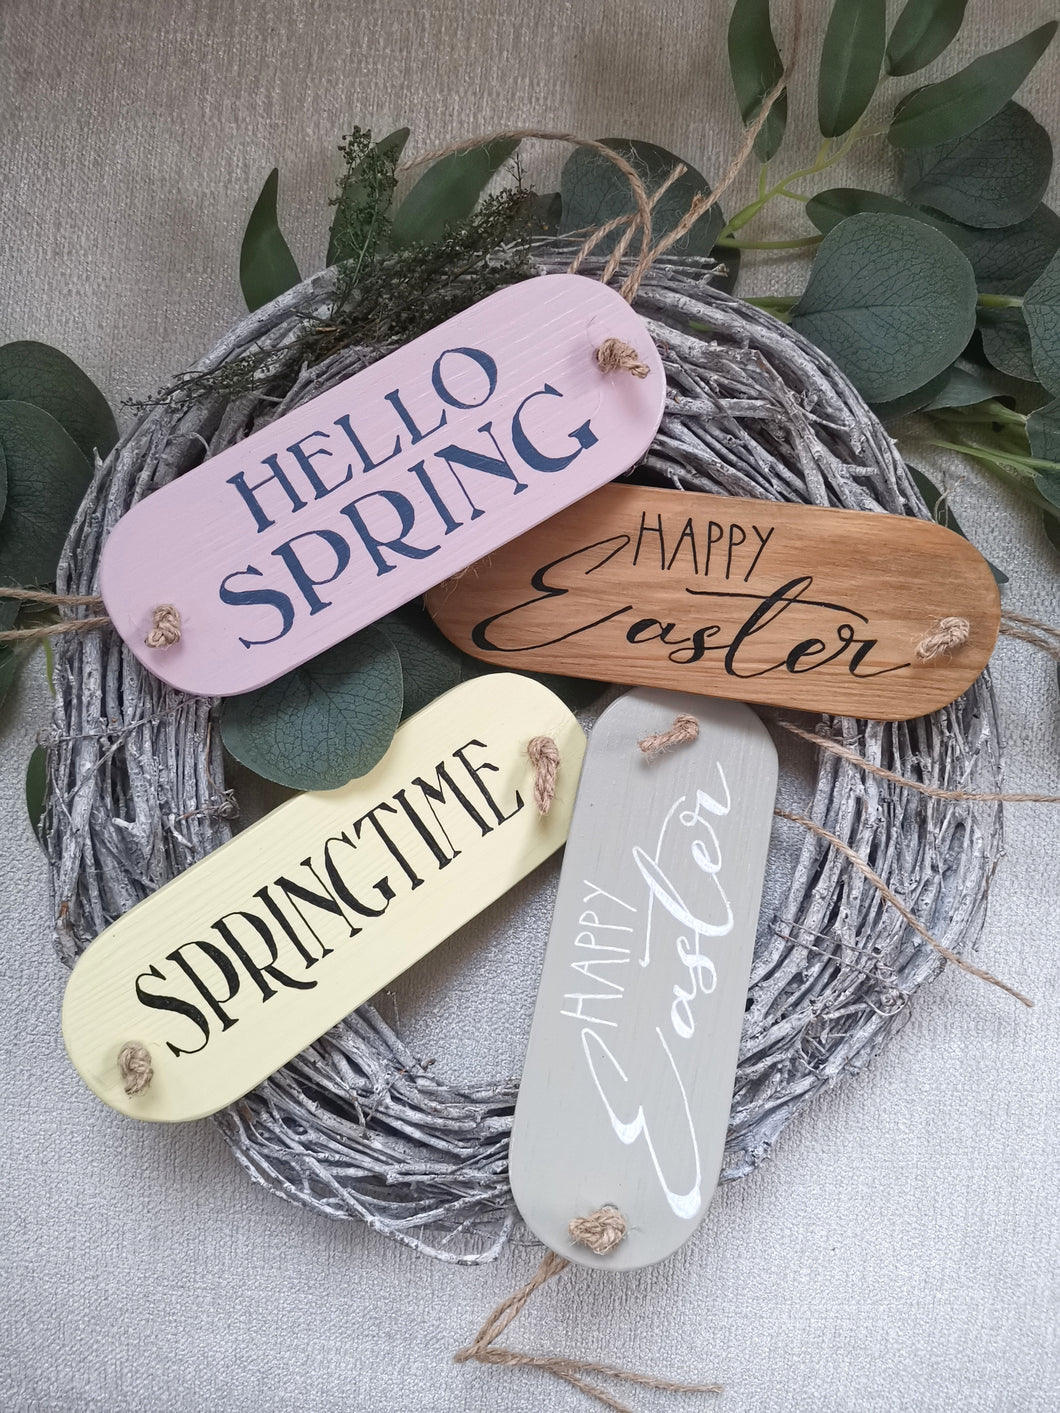 Wooden Tag for Spring / Easter wreath